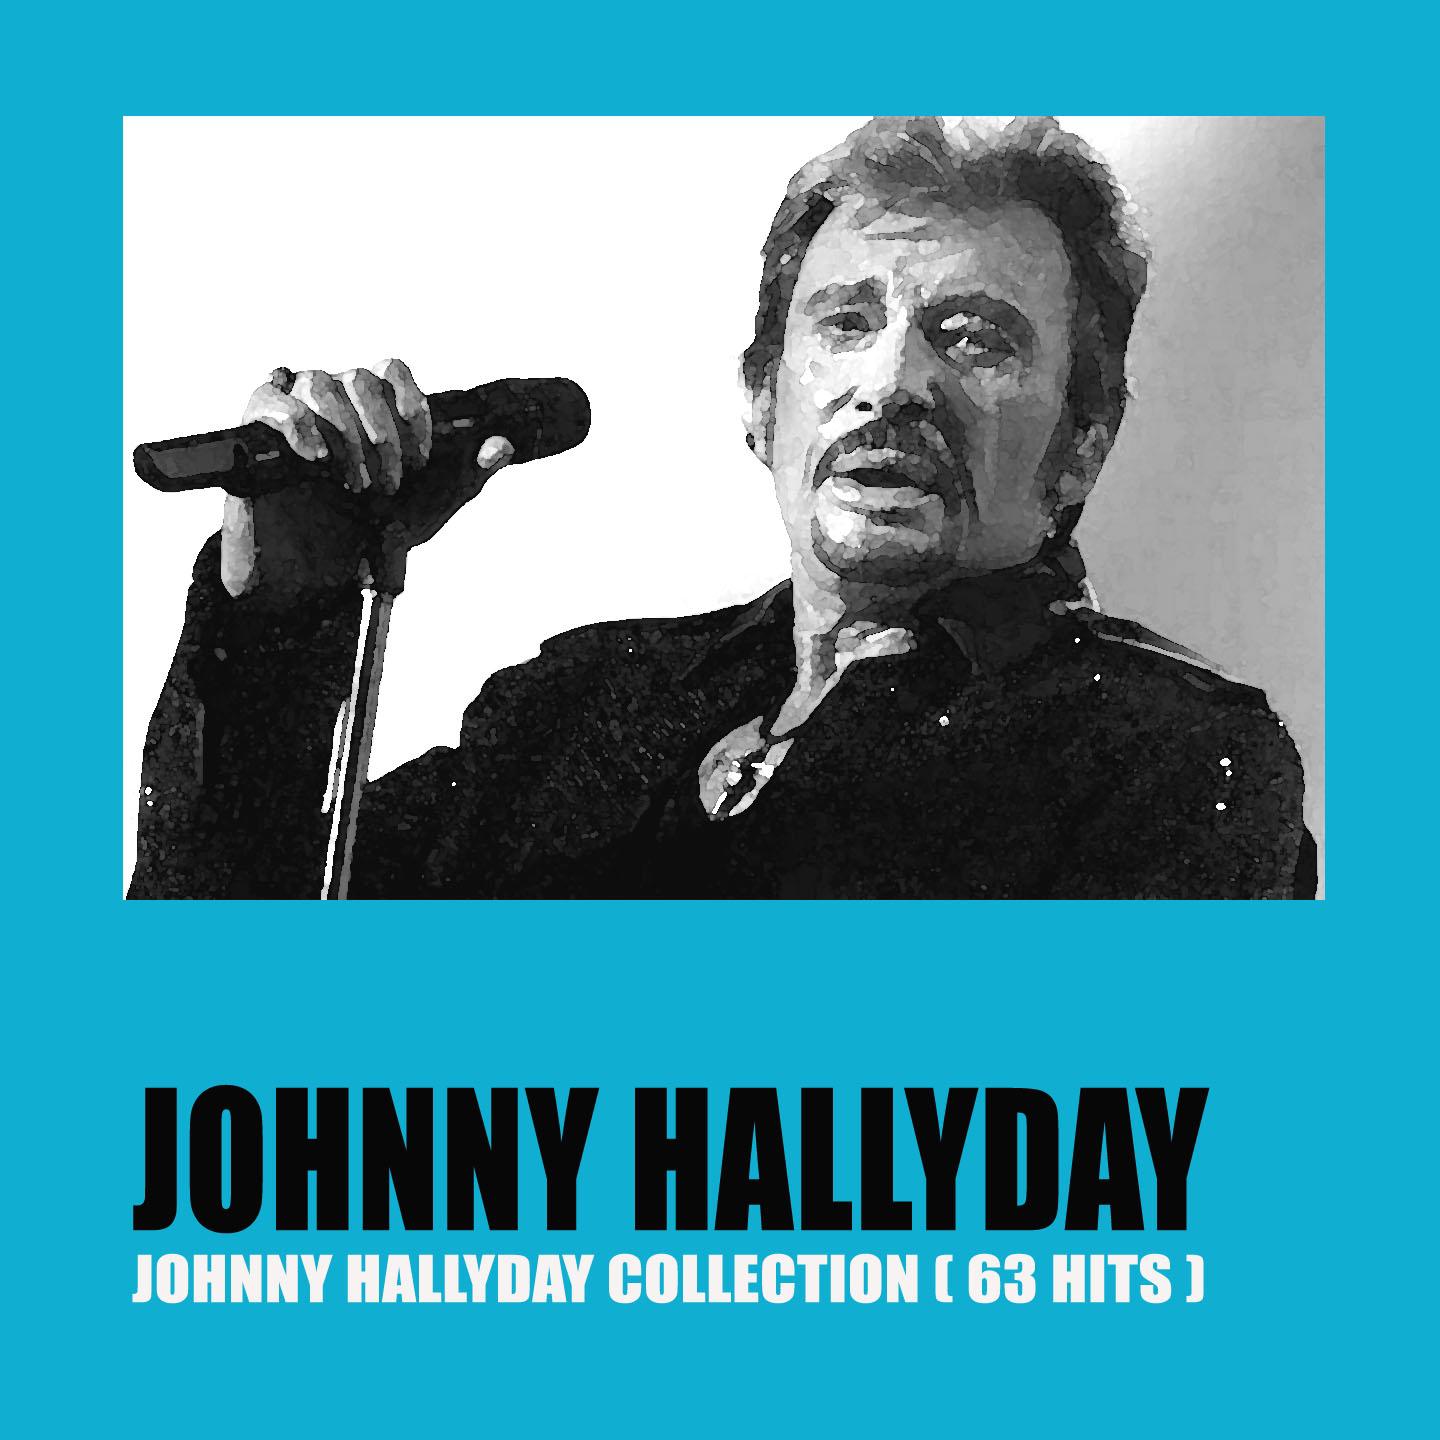 Johnny Hallyday Collection (63 Hits)